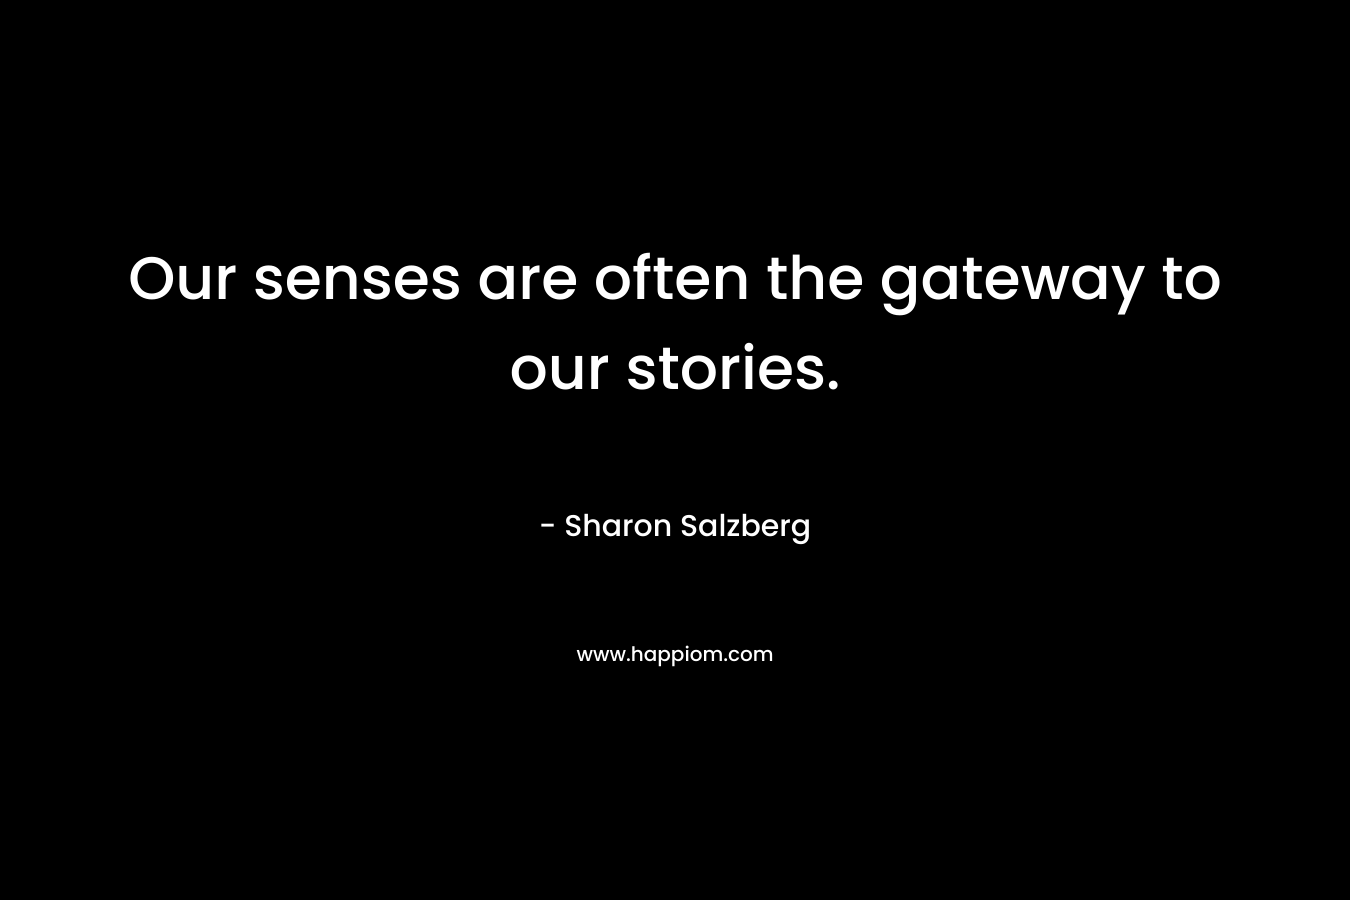 Our senses are often the gateway to our stories.